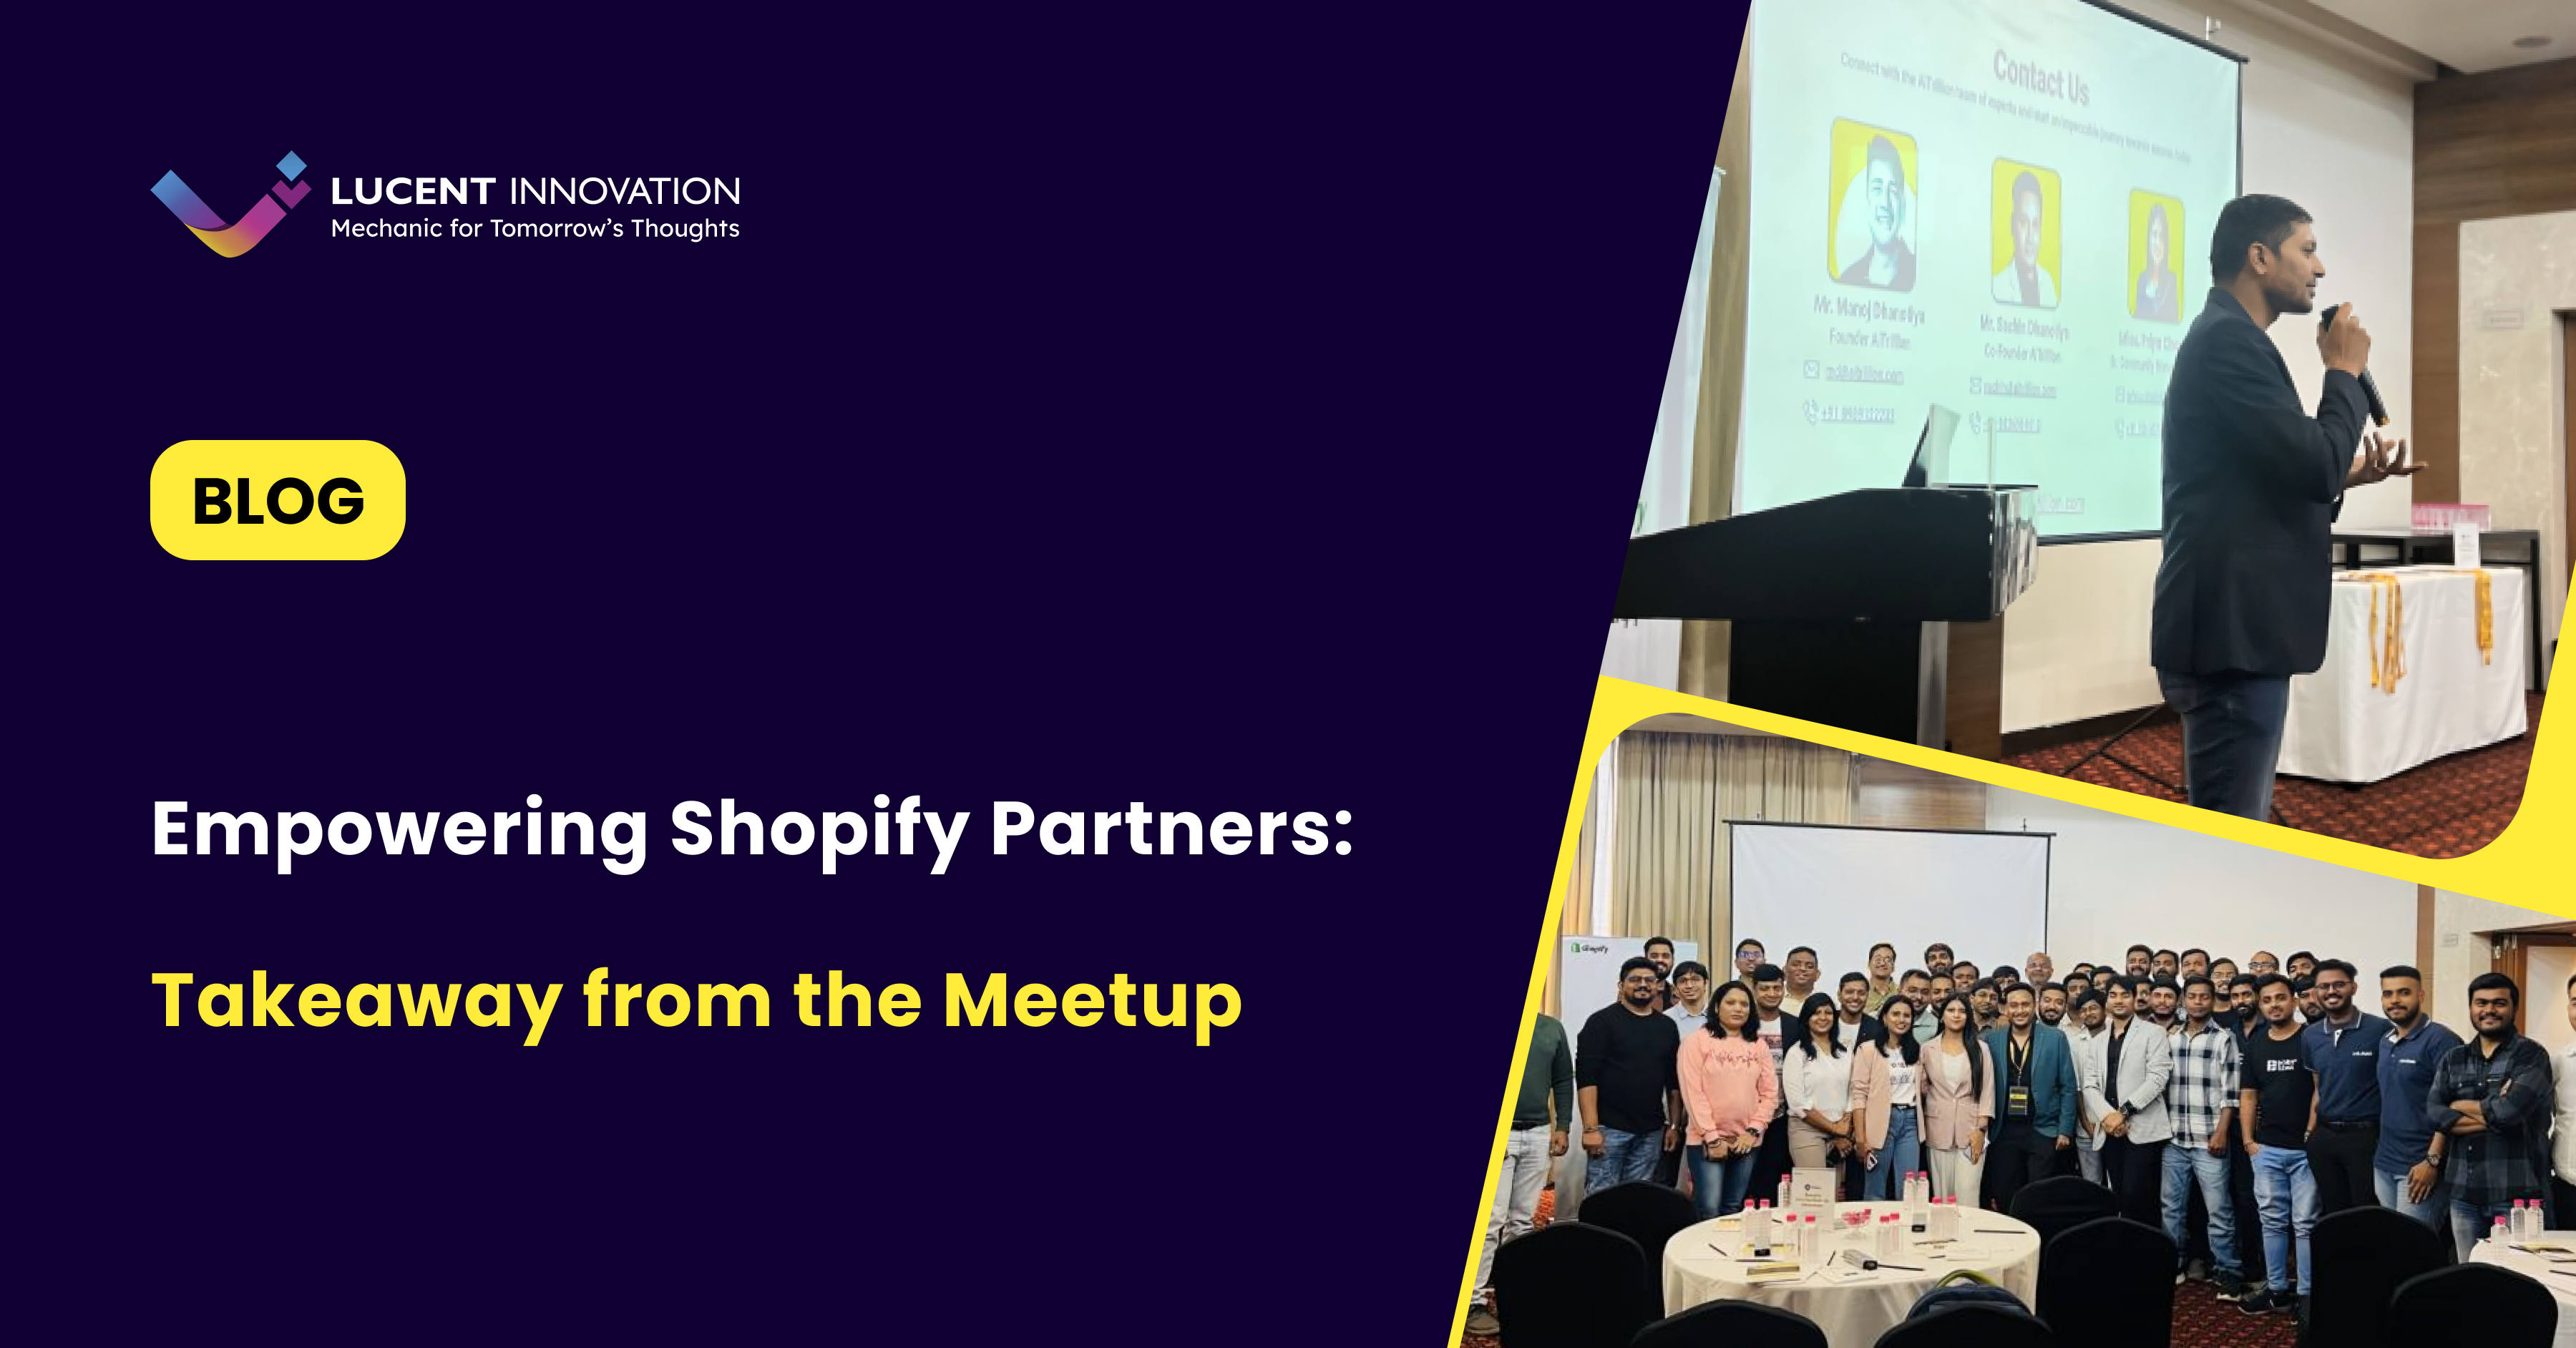 Empowering Shopify Partners: Takeaway from the Meetup